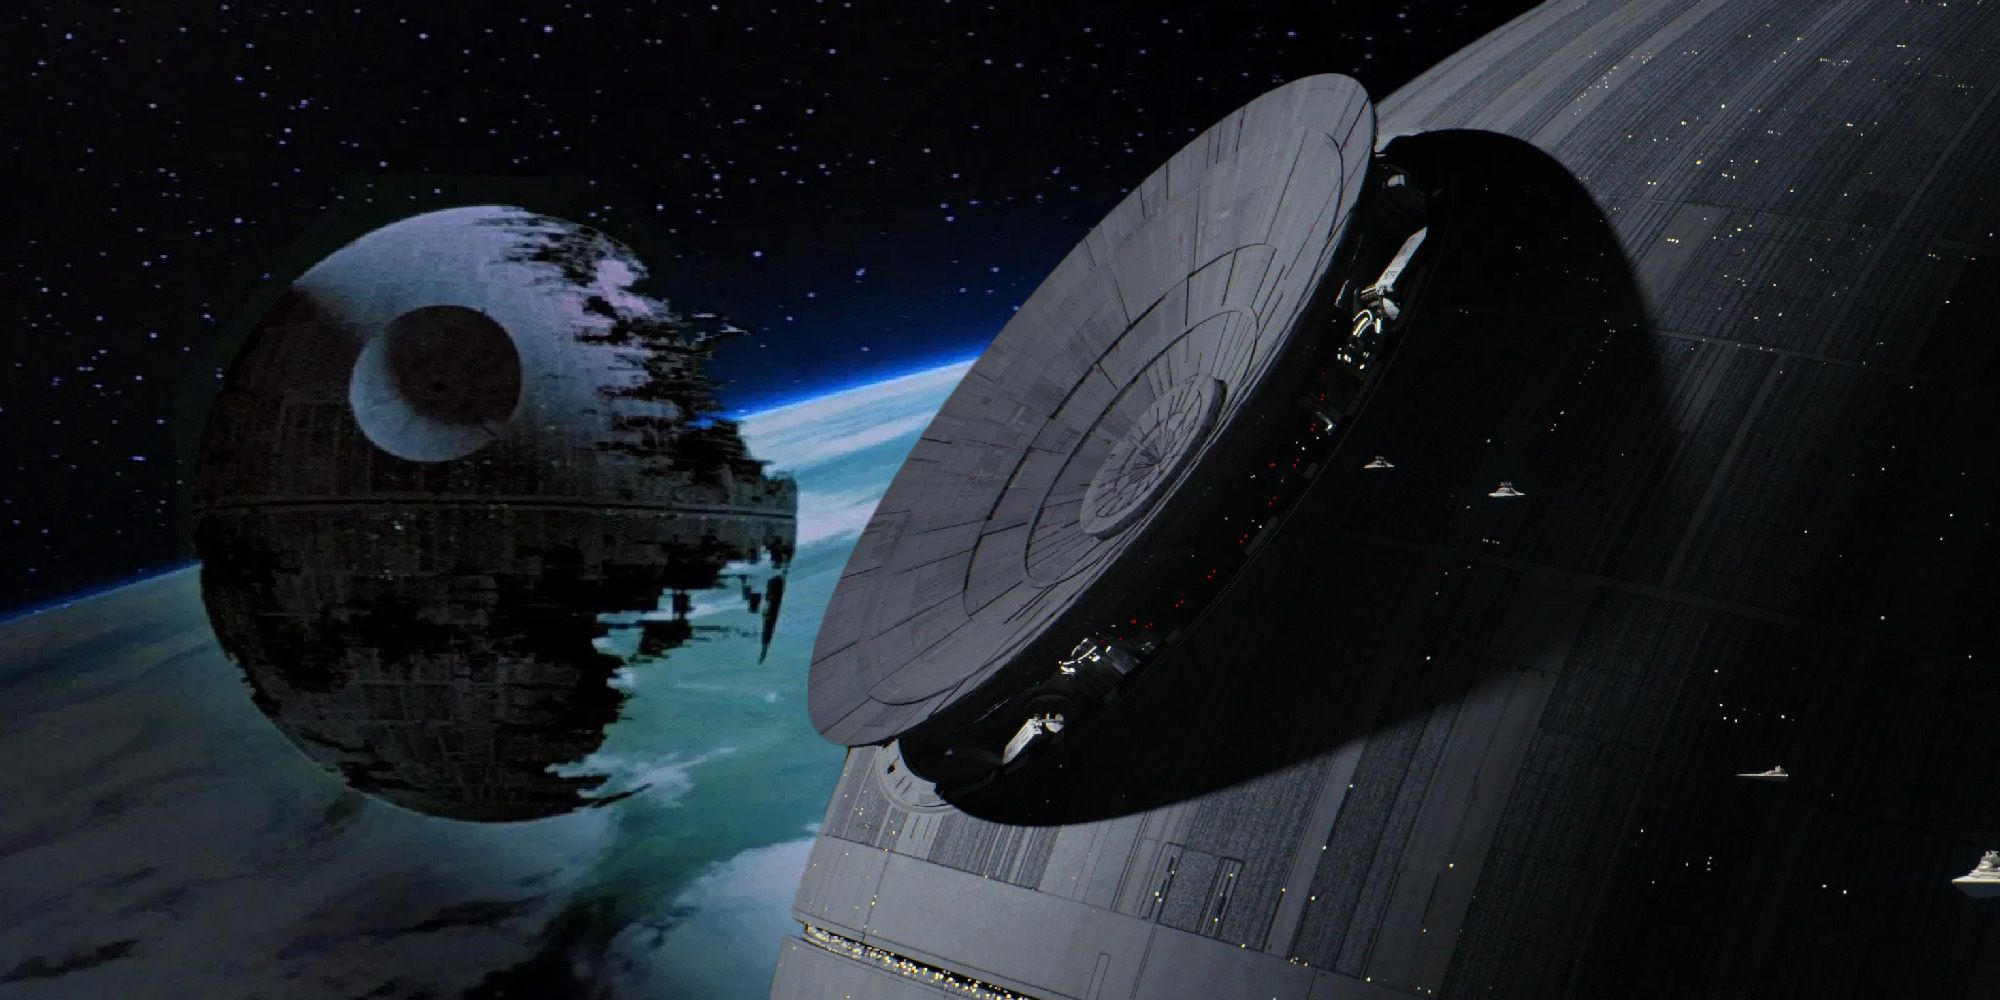 How The Second Death Stars Weakness Was So Similar To The Original